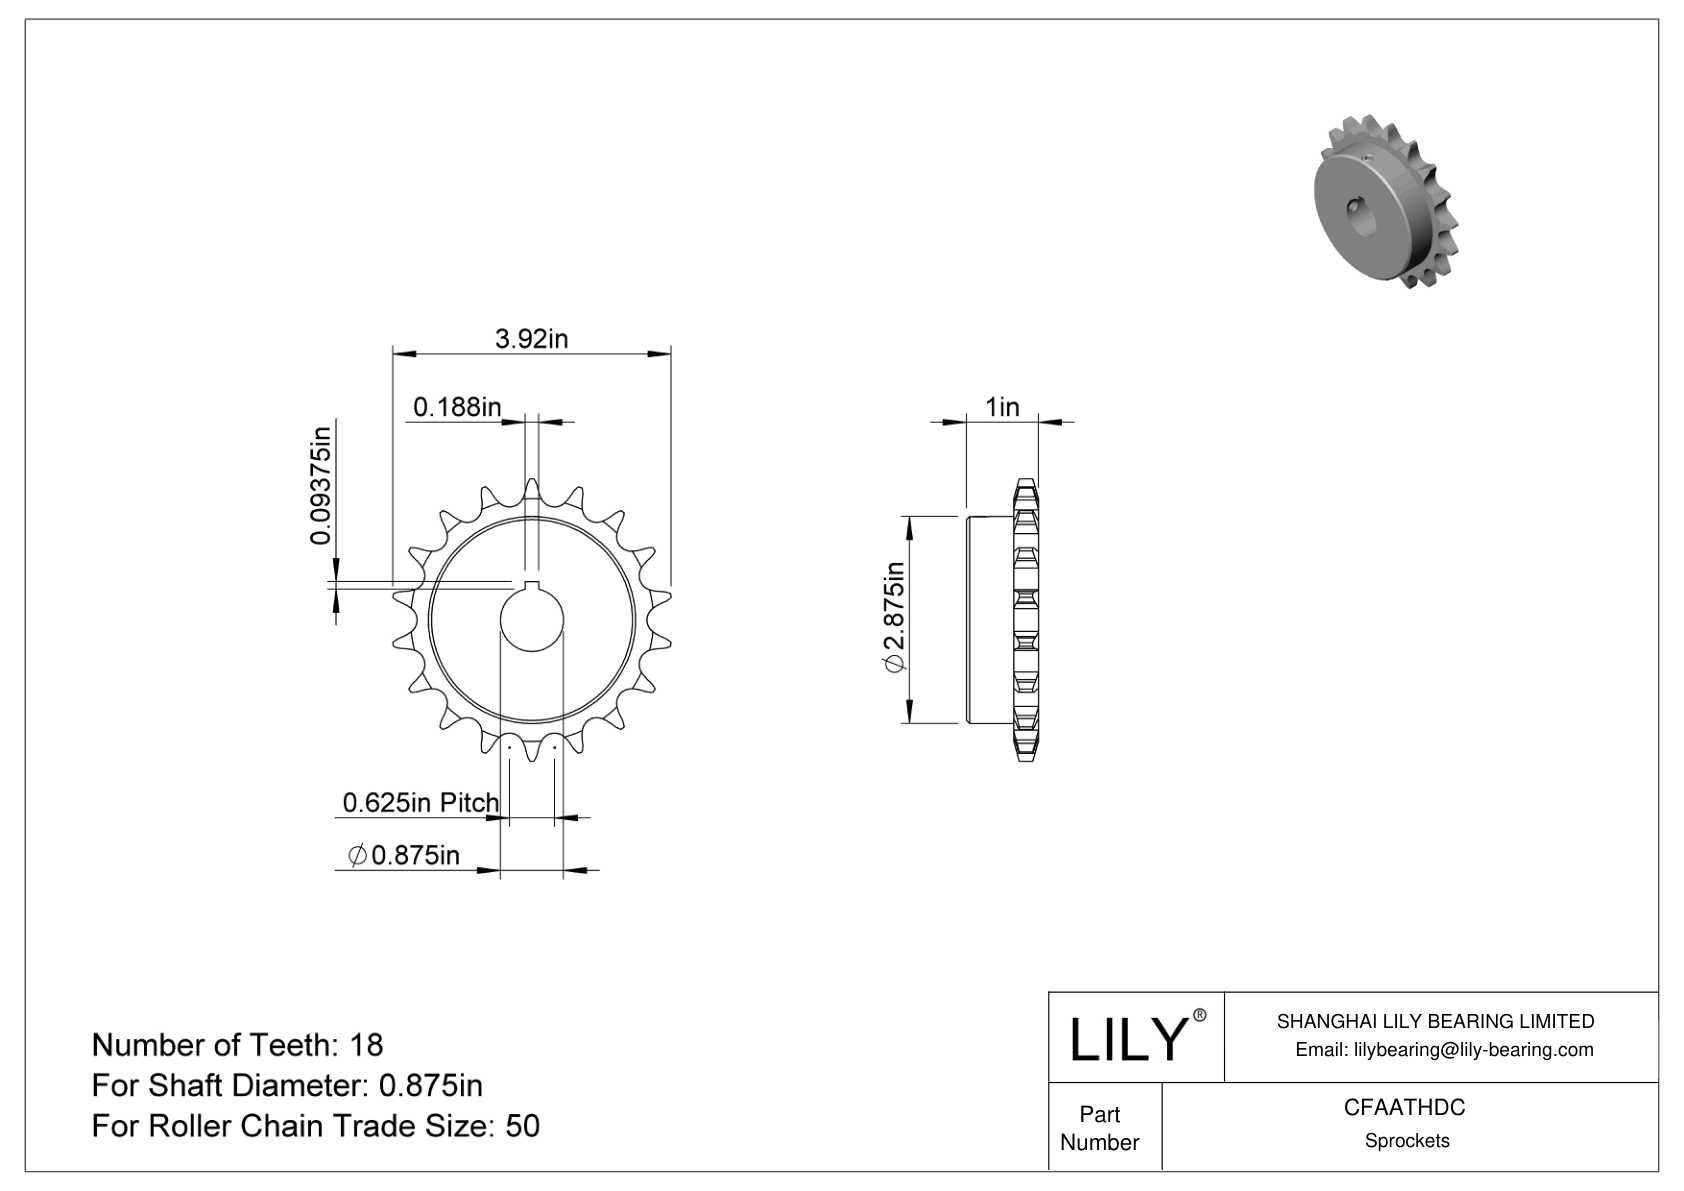 CFAATHDC Wear-Resistant Sprockets for ANSI Roller Chain cad drawing